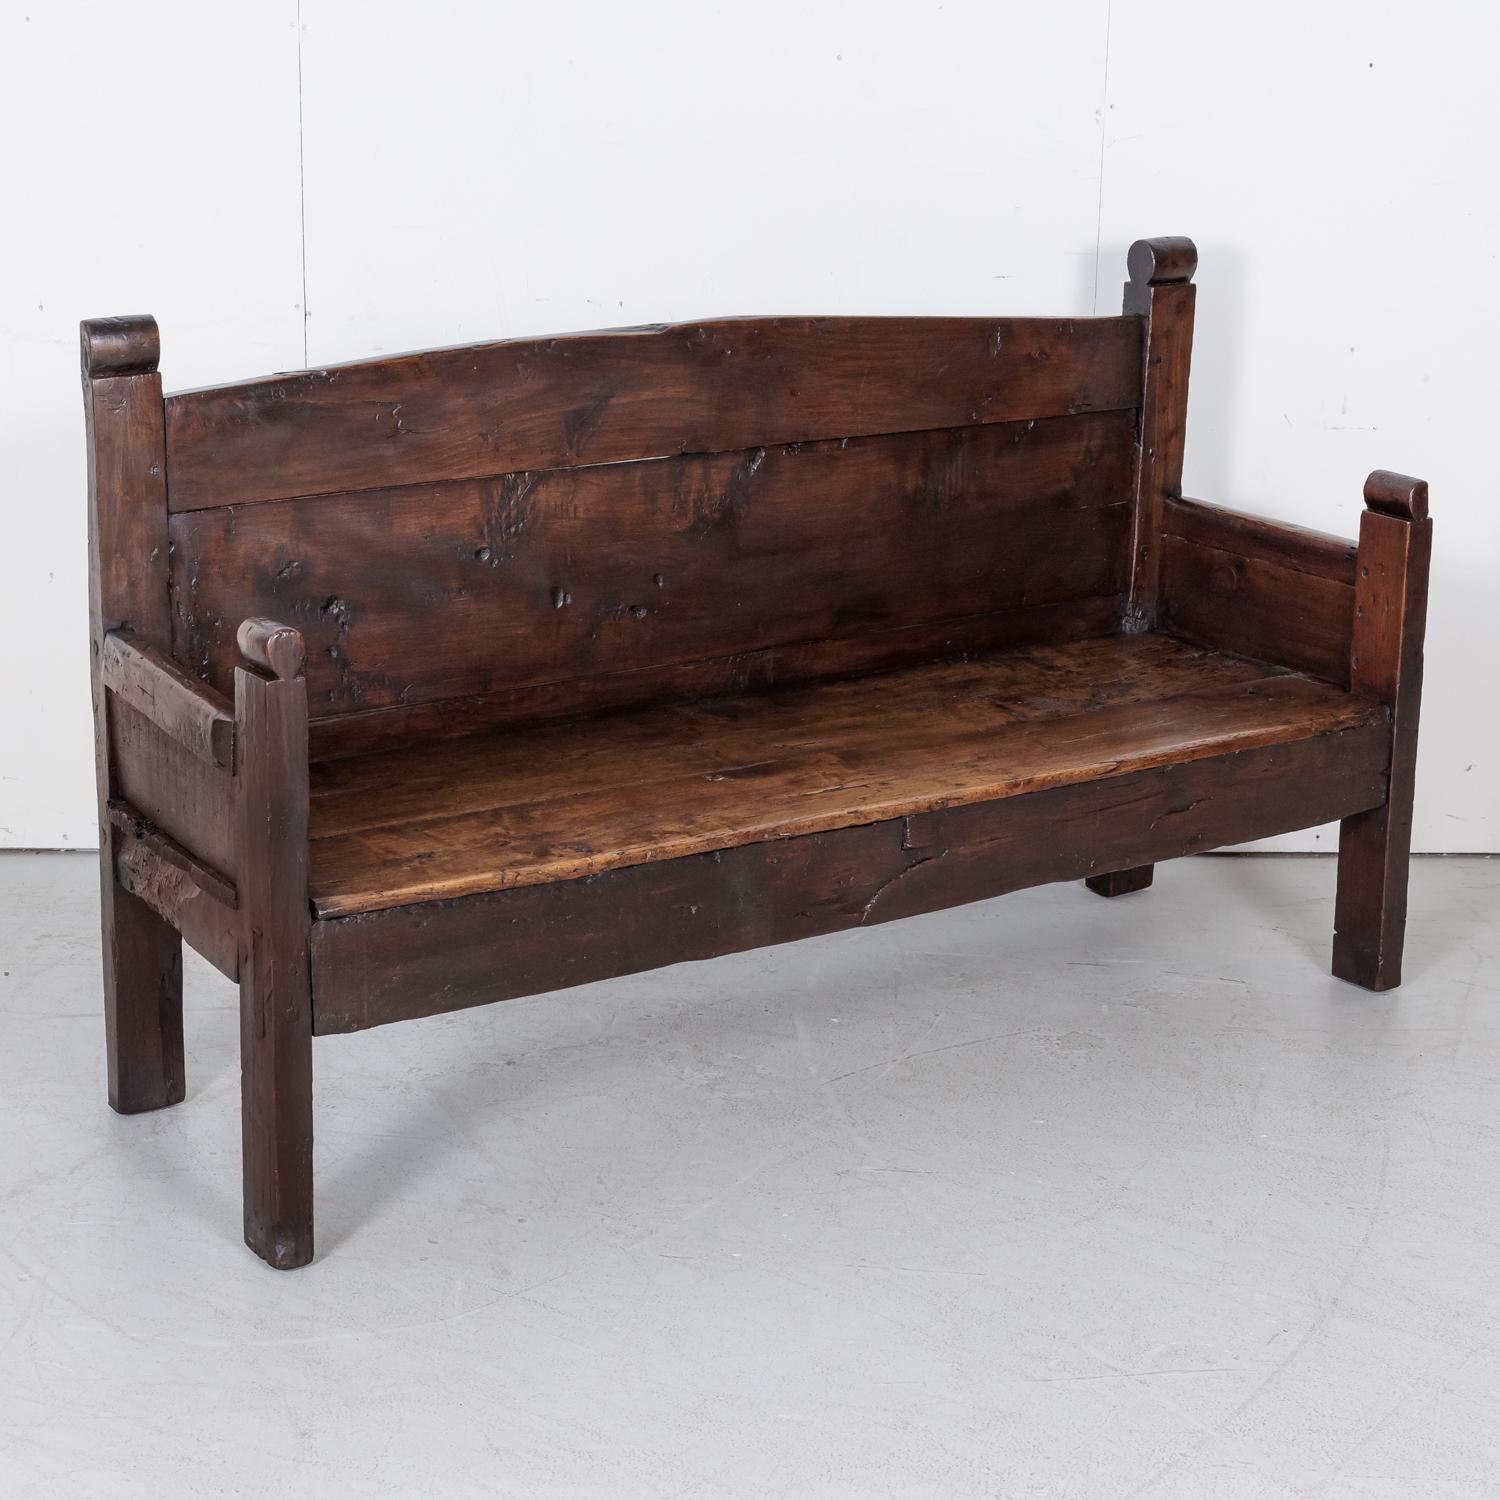 Rustic Mid-18th Century Spanish Walnut Bench with Arms 1